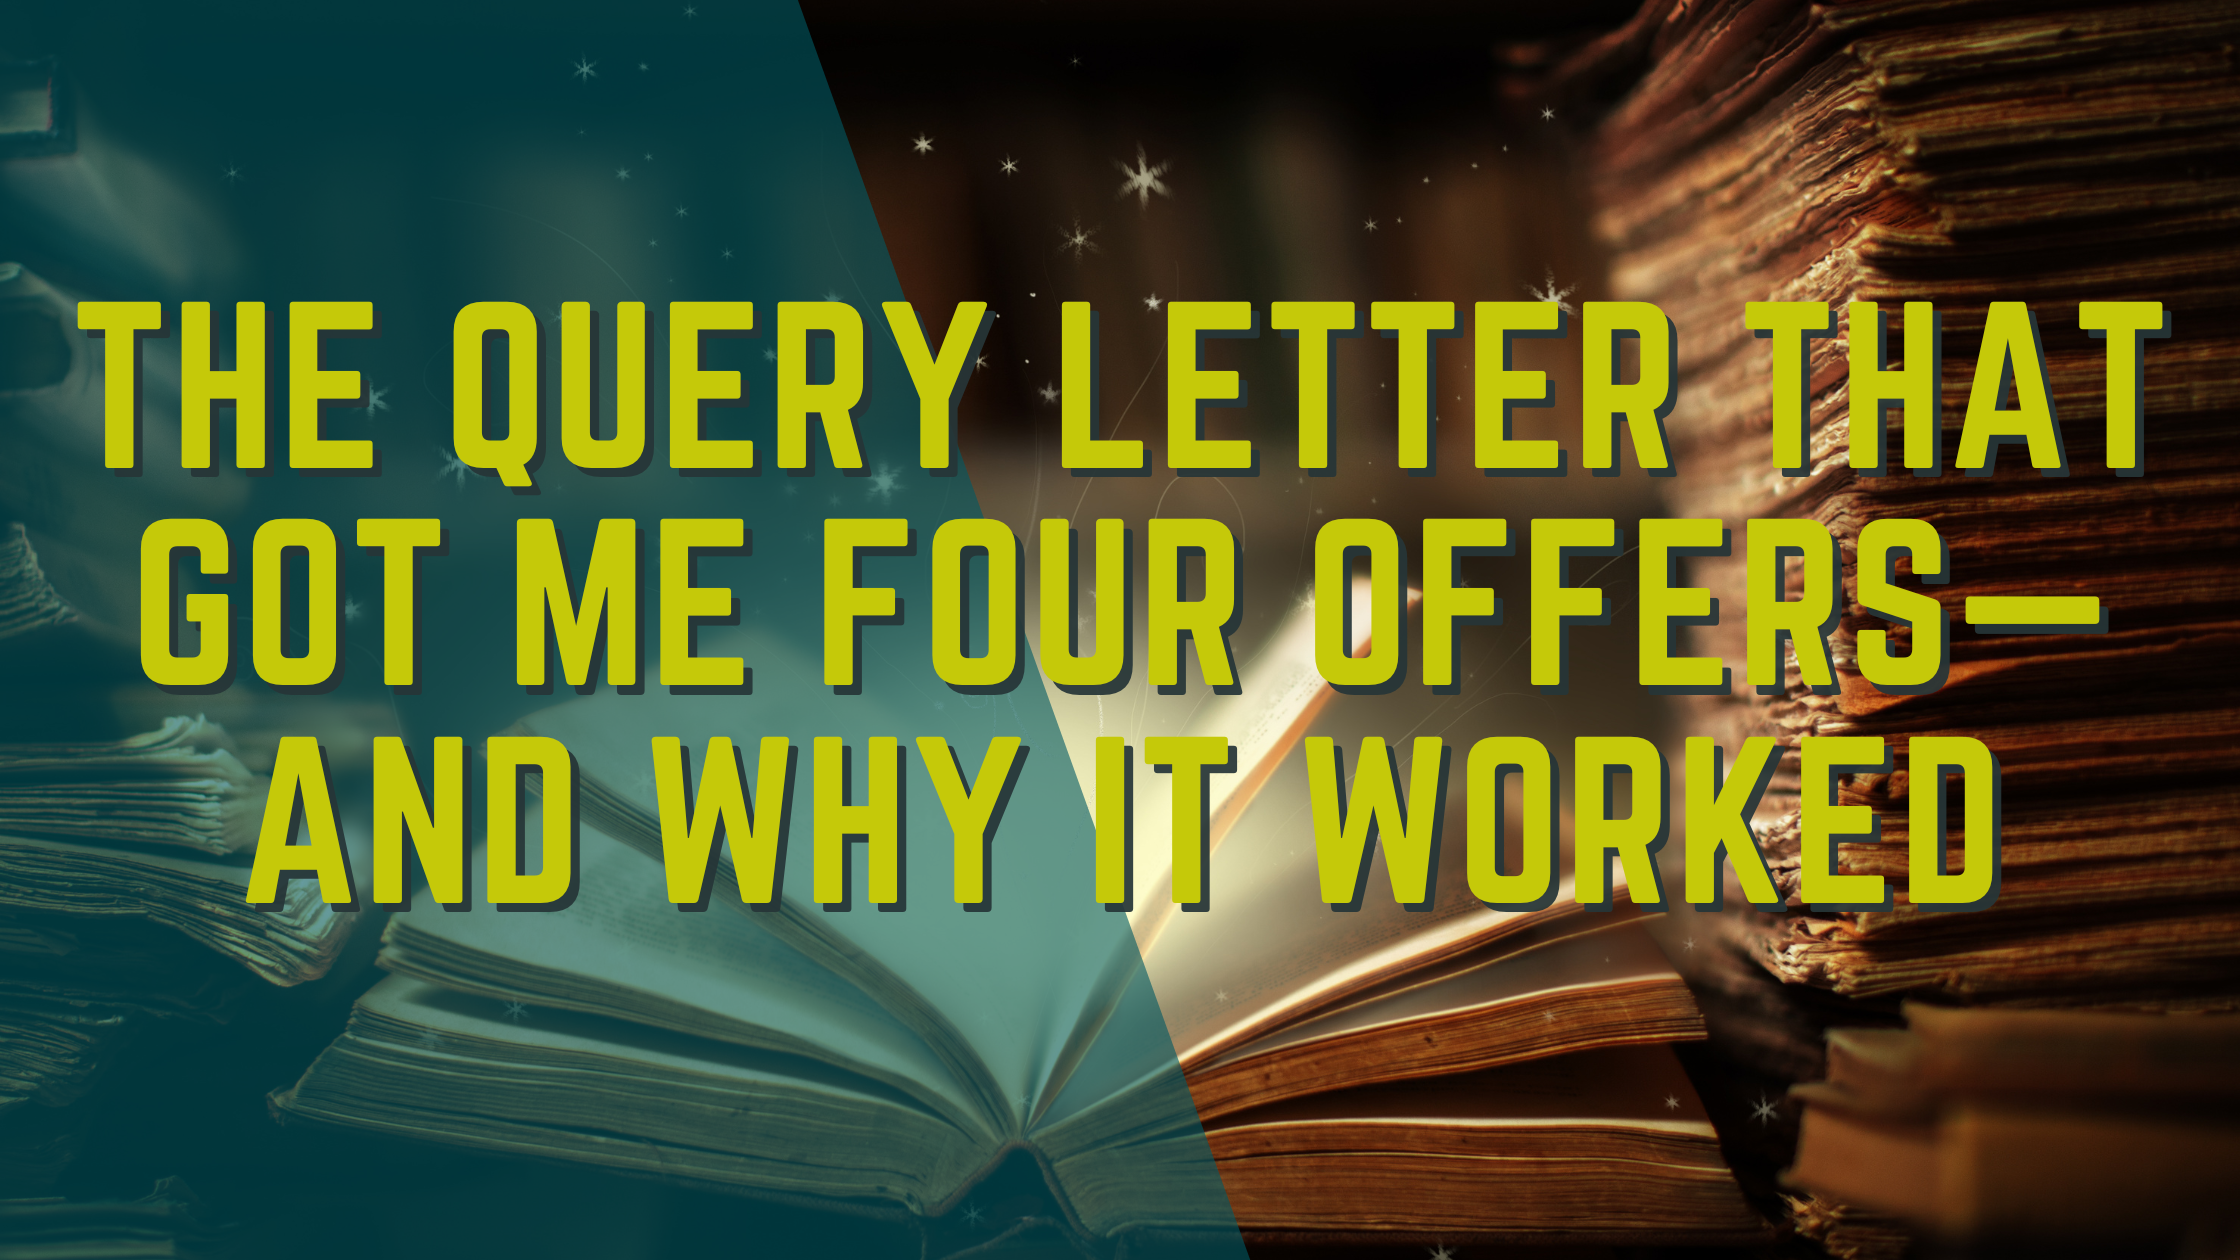 The query letter that got me FOUR offers of representation from literary agents—and why it worked